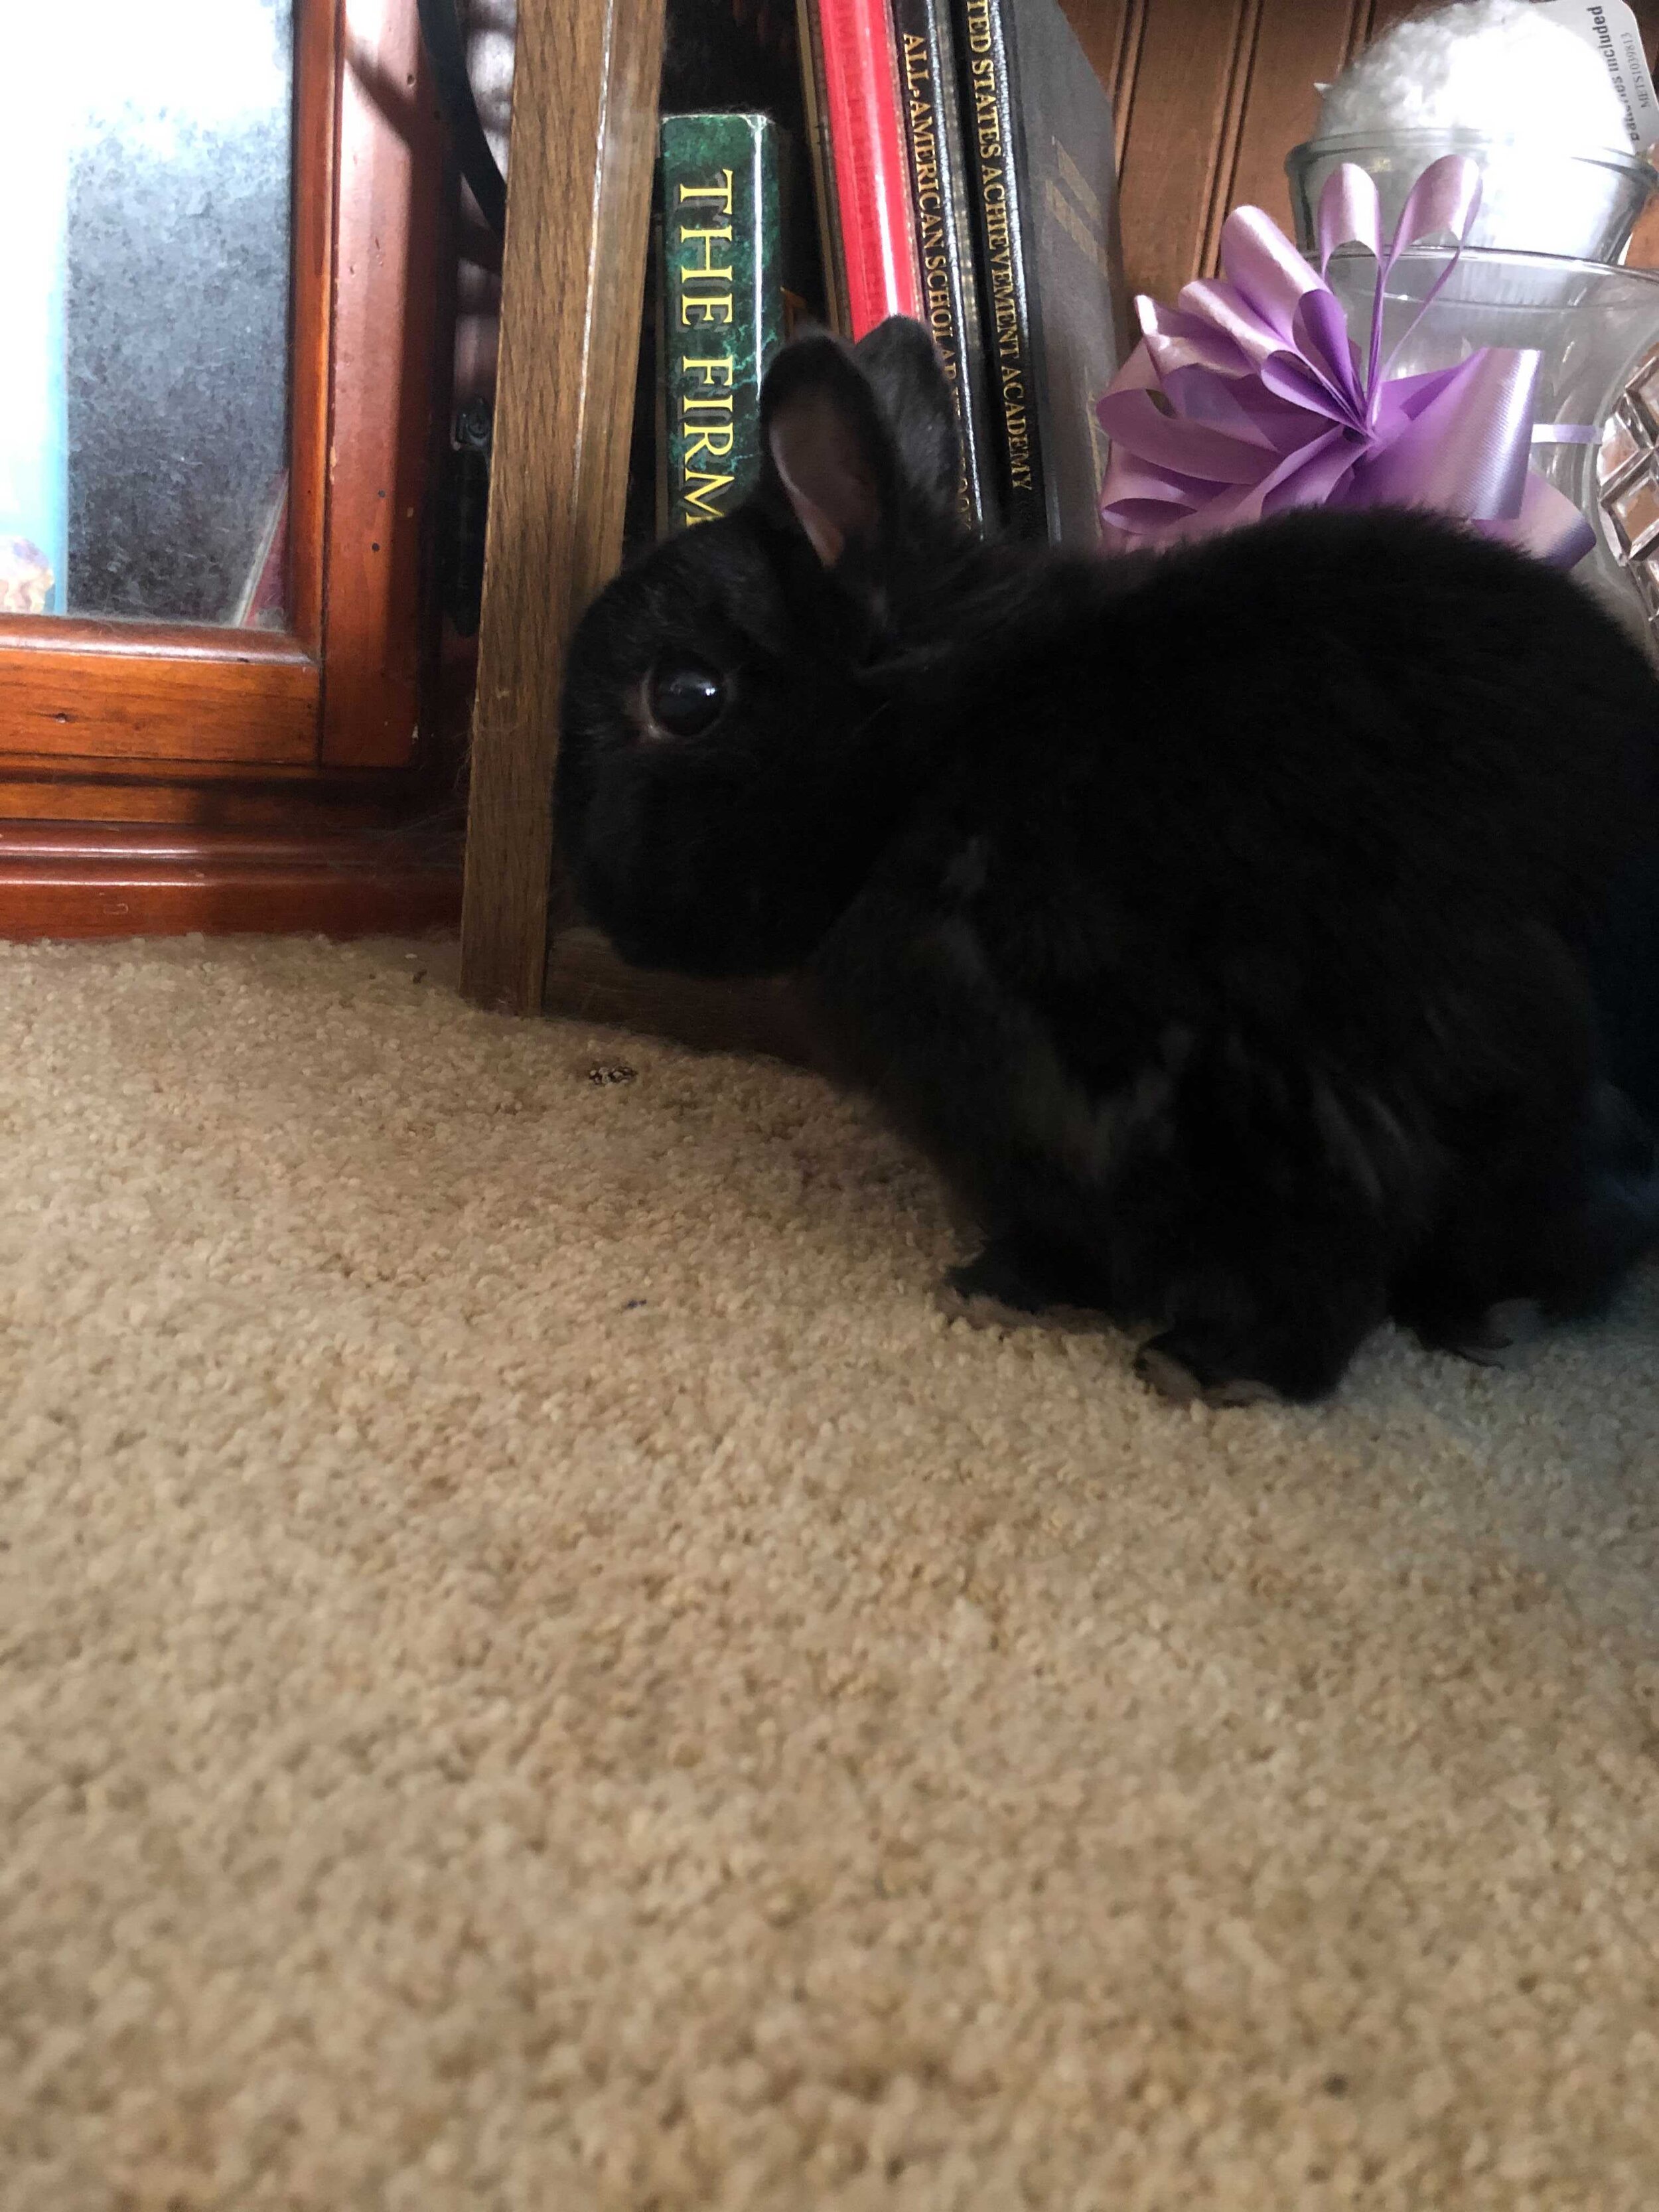  A black bunny sitting facing the left in front of a bookshelf on carpet.  